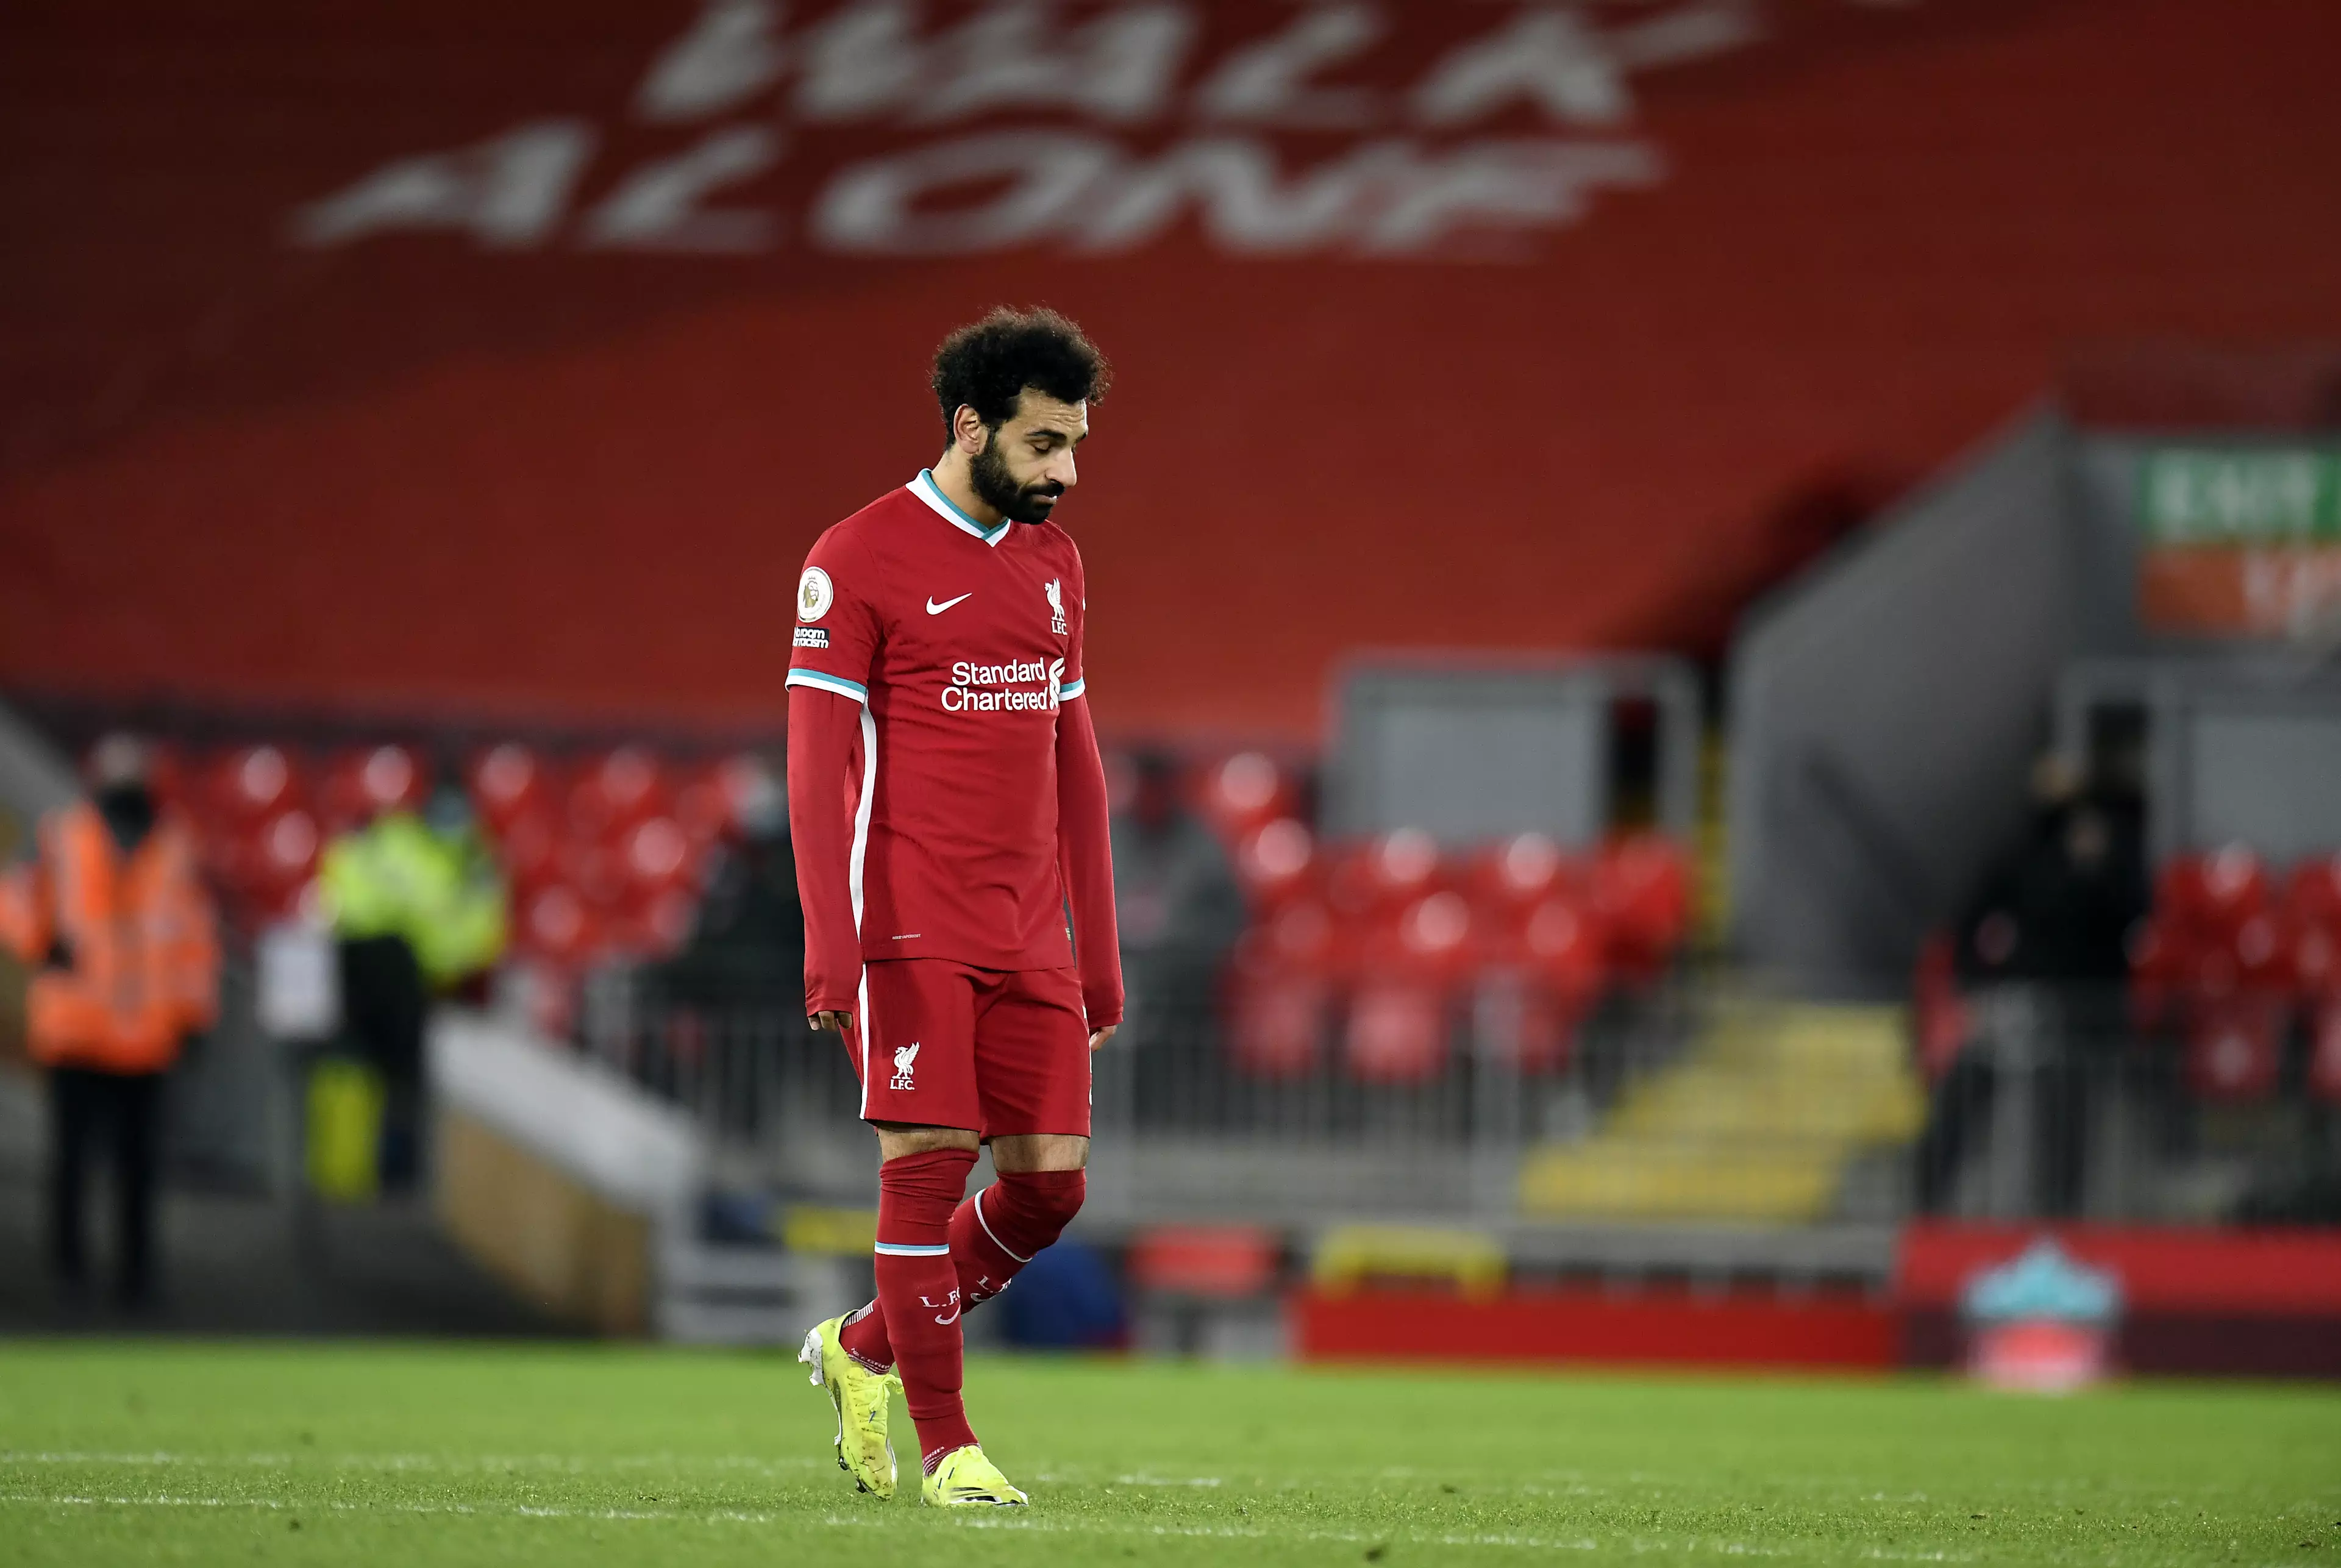 Mohamed Salah sums up the mood at Anfield. Image: PA Images